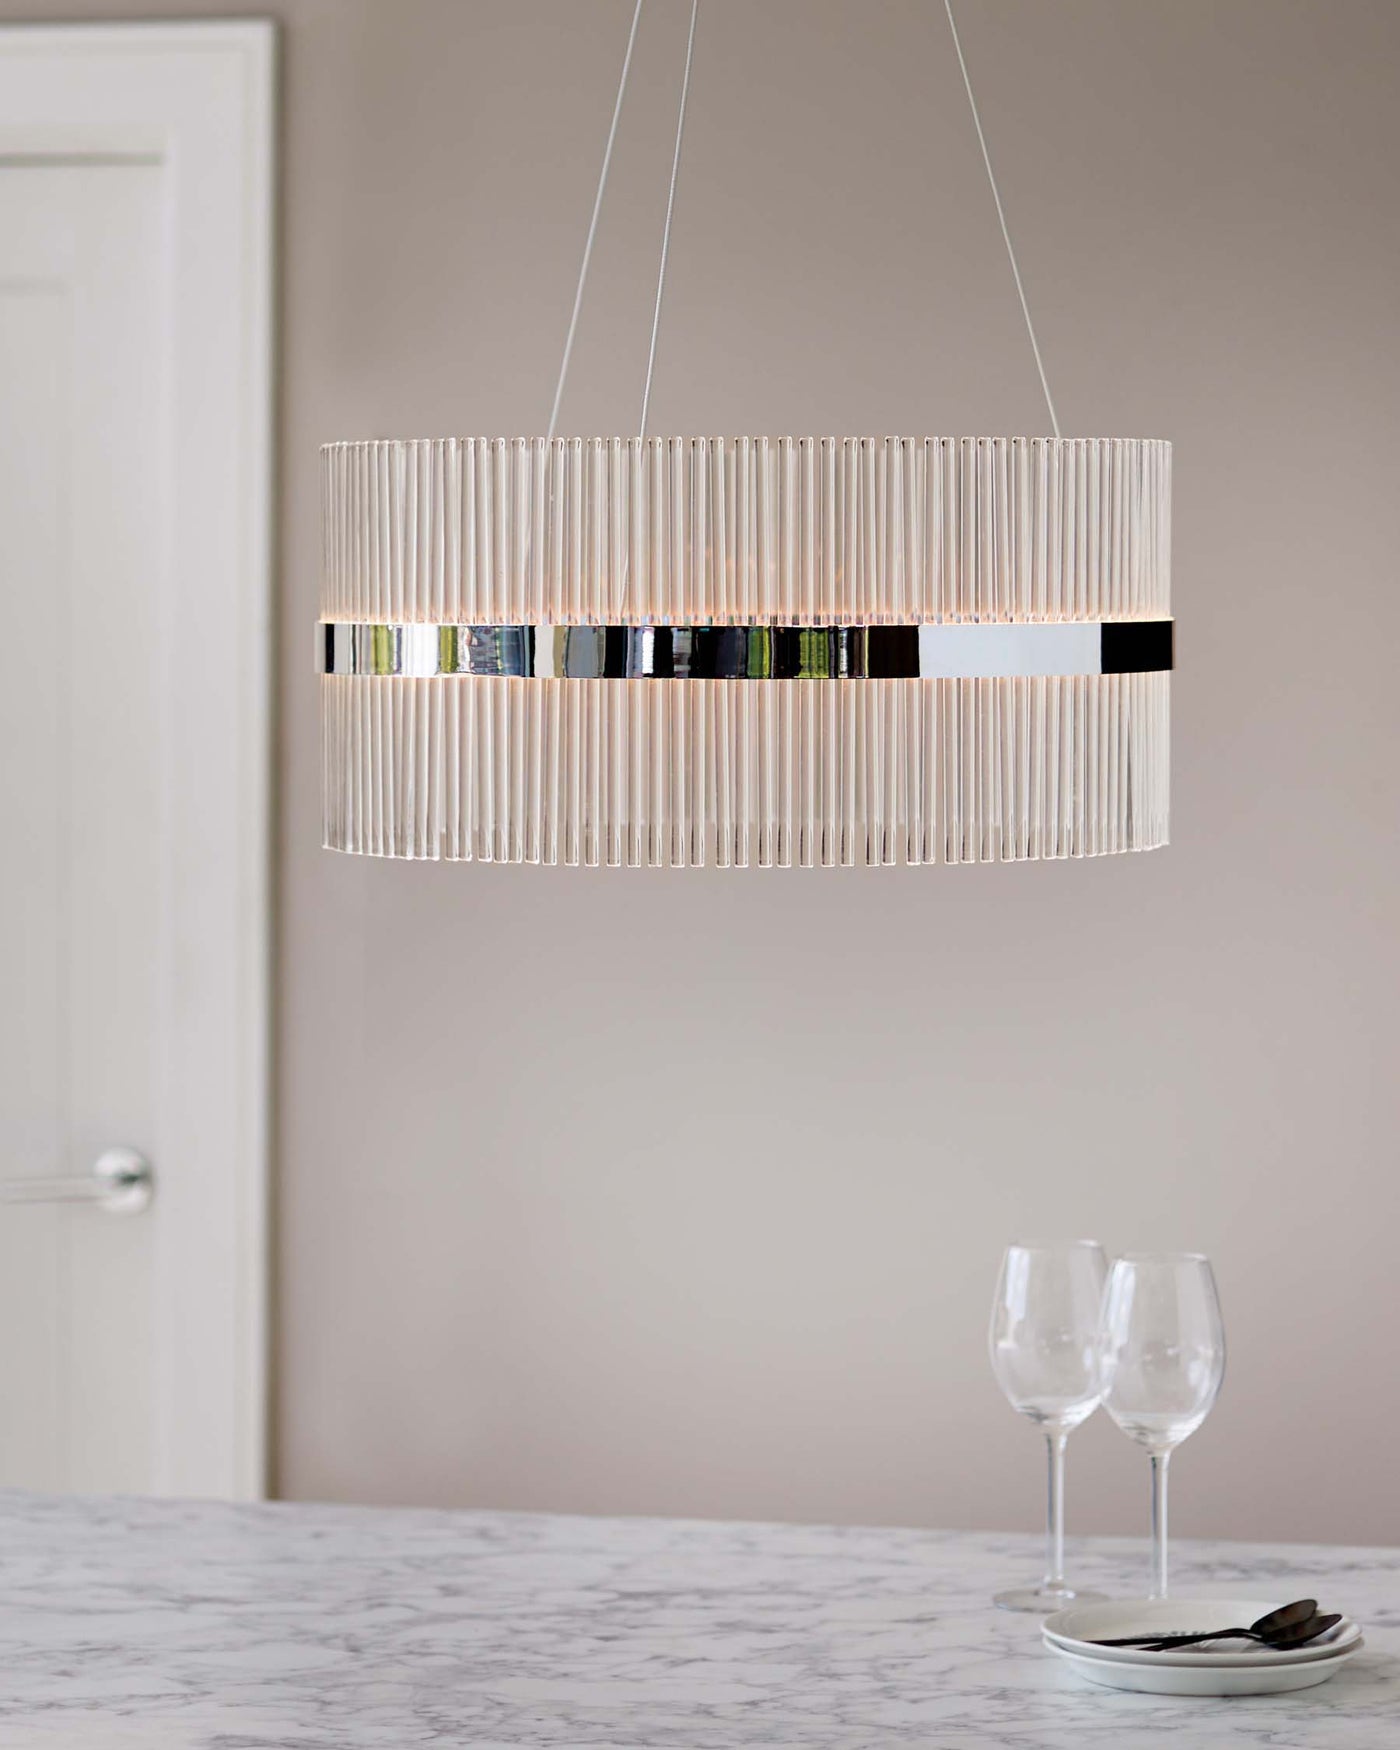 Contemporary pendant light with cylindrical clear glass rods and sleek black accent band, suspended above a marble countertop displaying stemware and flatware.